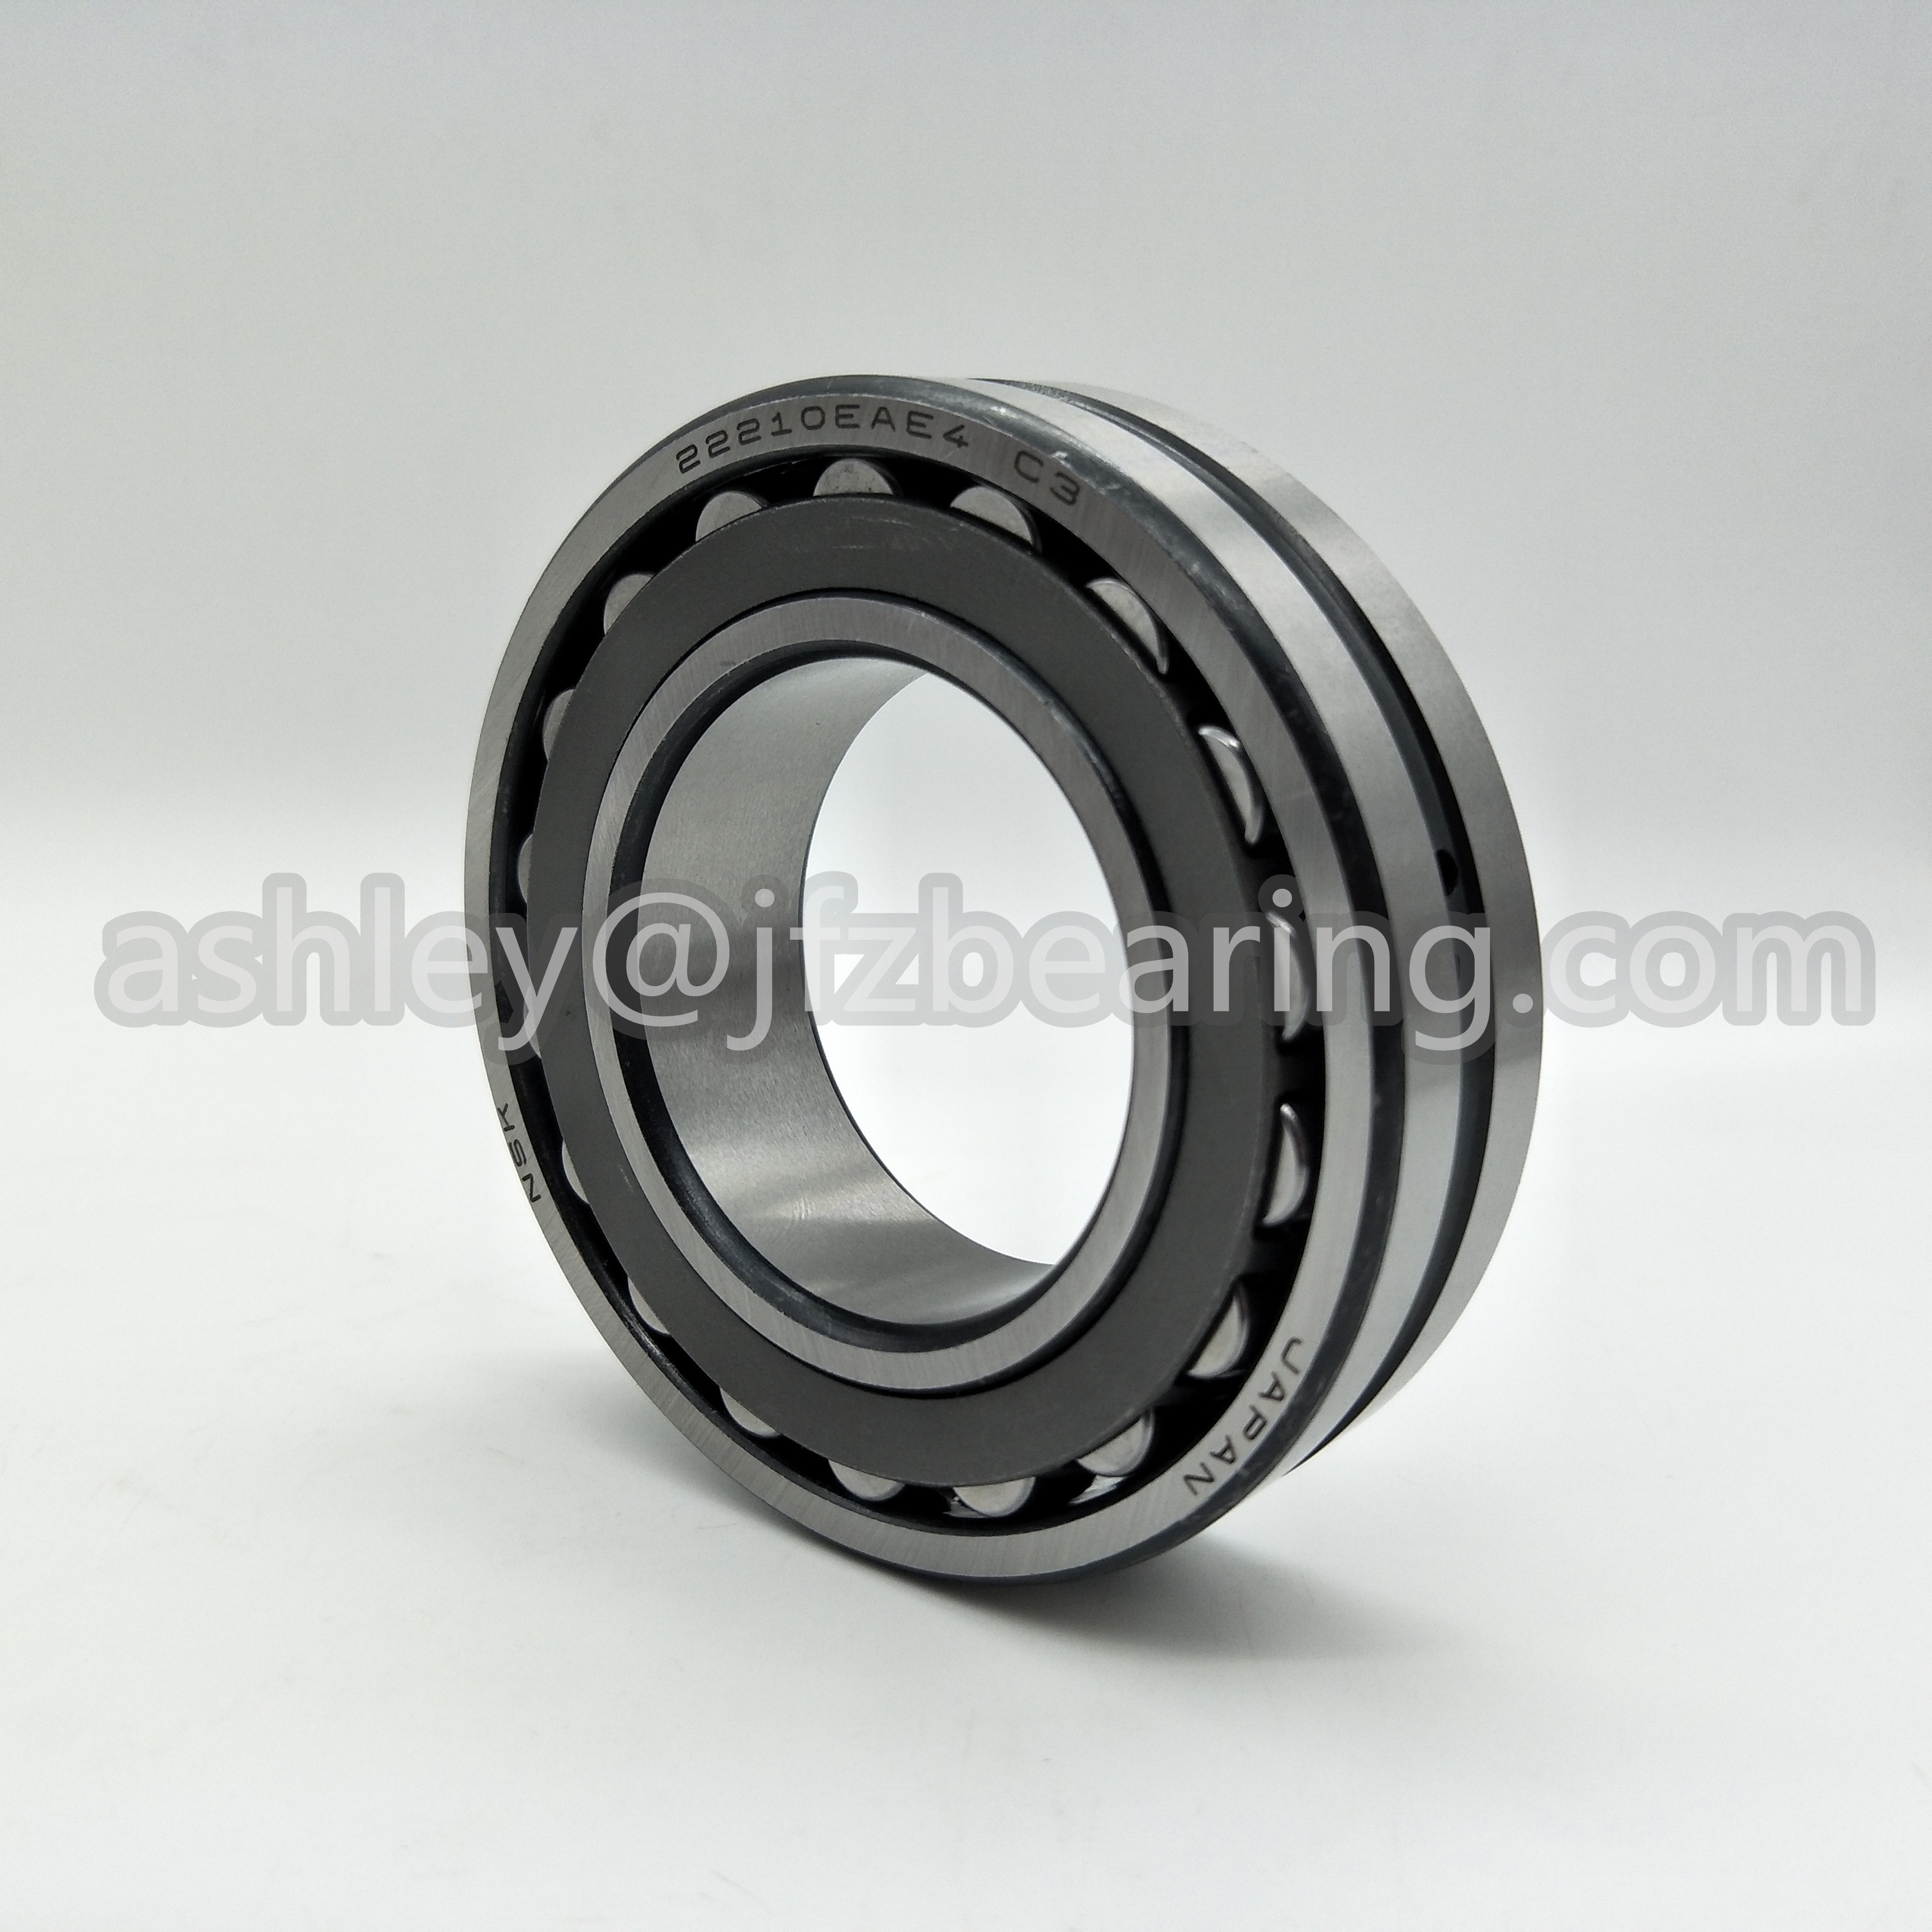 Quality NSK 22210EAE4 Spherical Roller Bearing, Round Bore, Pressed Steel Cage, Metric, 50mm Bore, 90mm OD, 23mm Width for sale